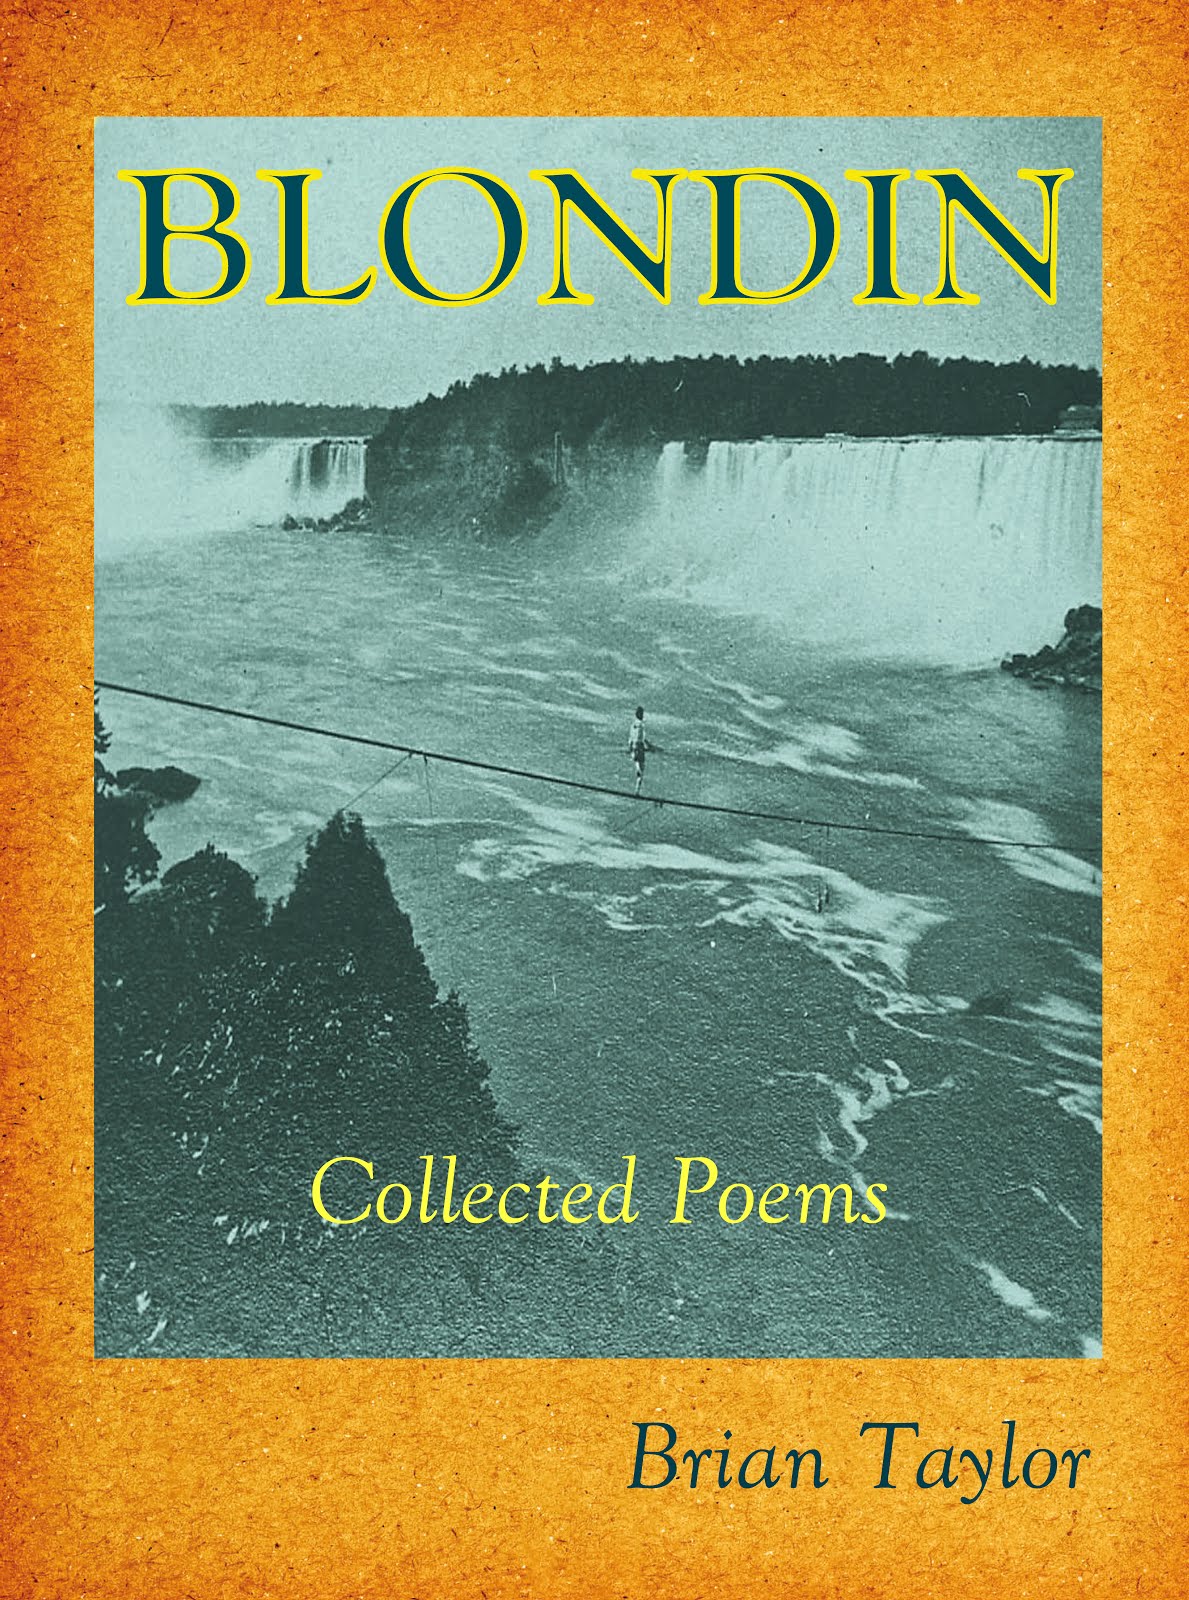 NEW EDITION 2019 BLONDIN Collected Poems by Brian Taylor